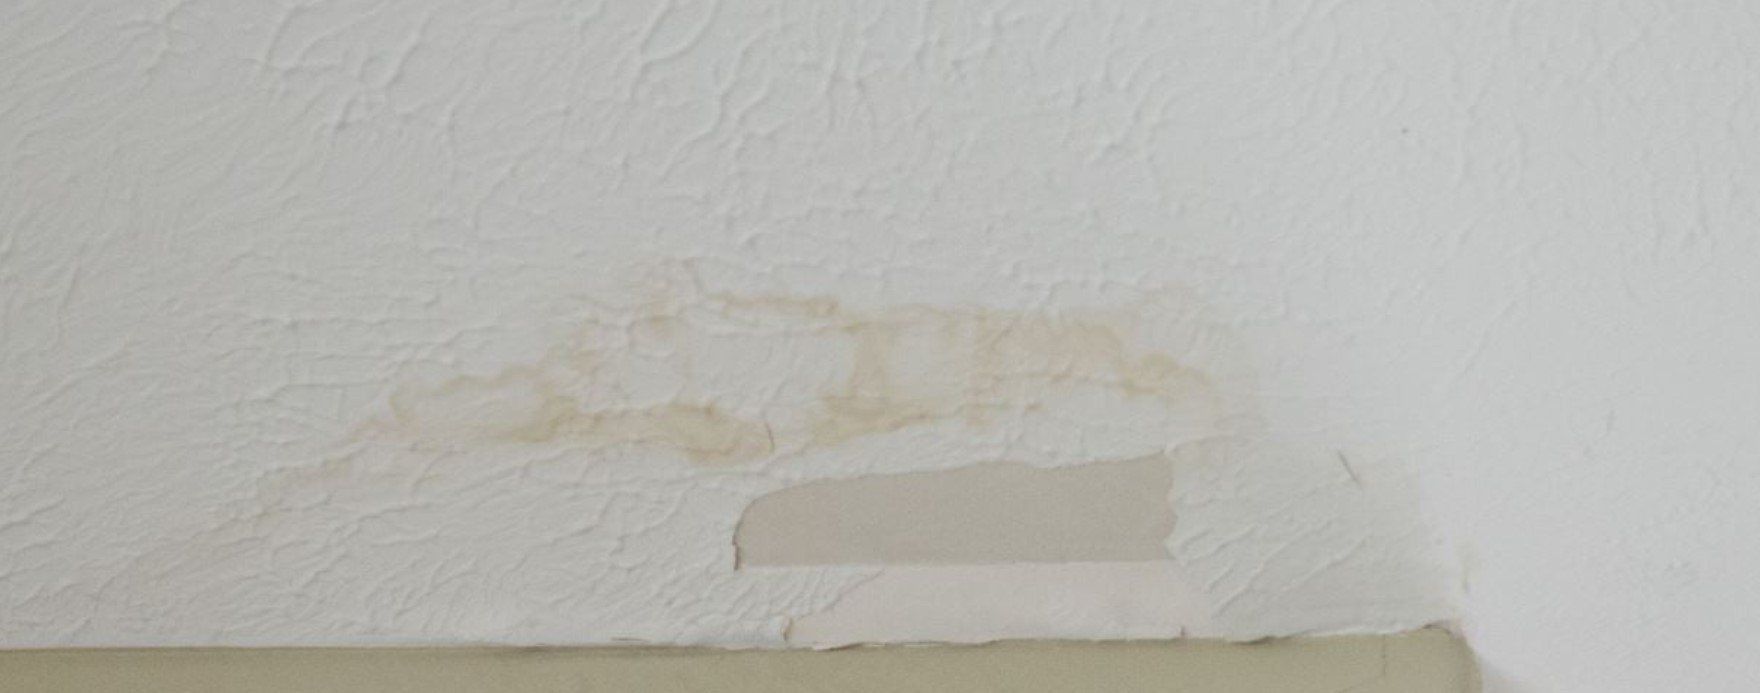 Fix Hole In Wall — Lincoln, NE — Patch Pros